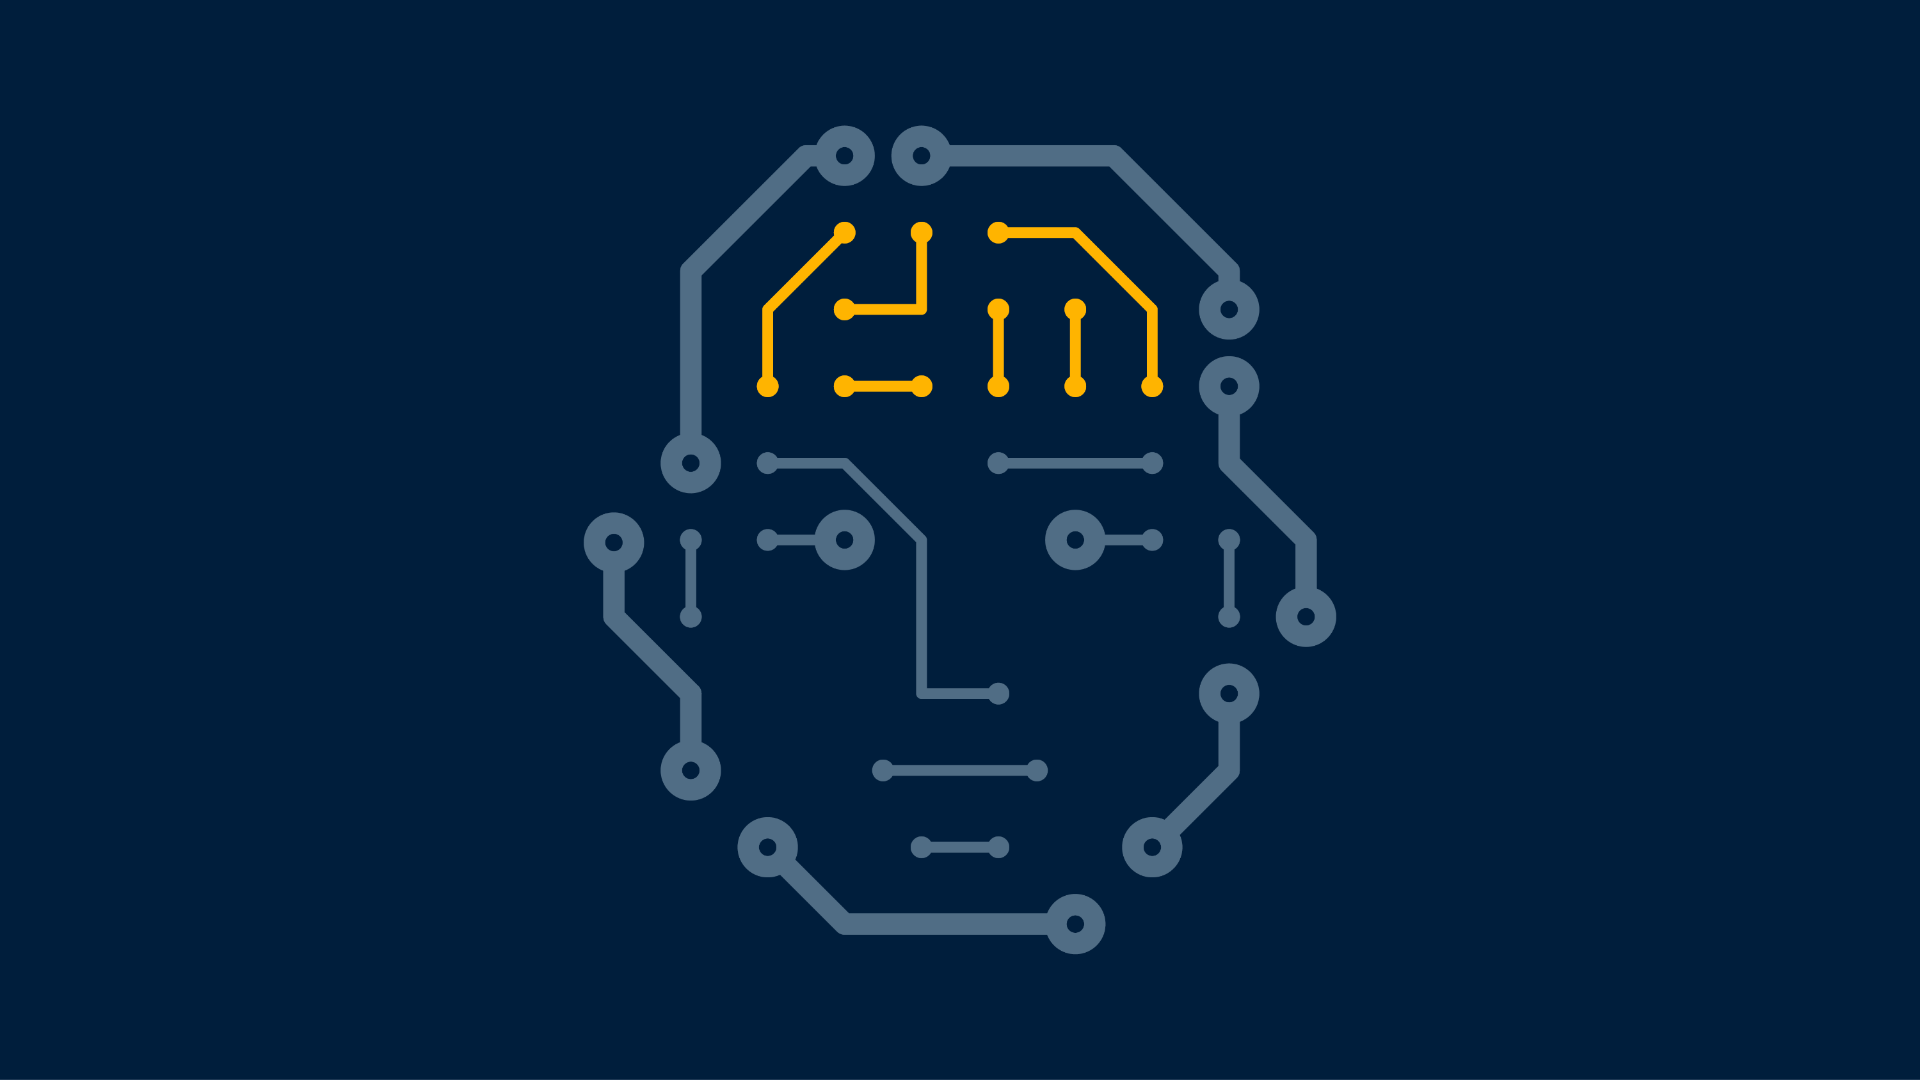 Pictogram with Artificial Intelligence | Smart algorithms